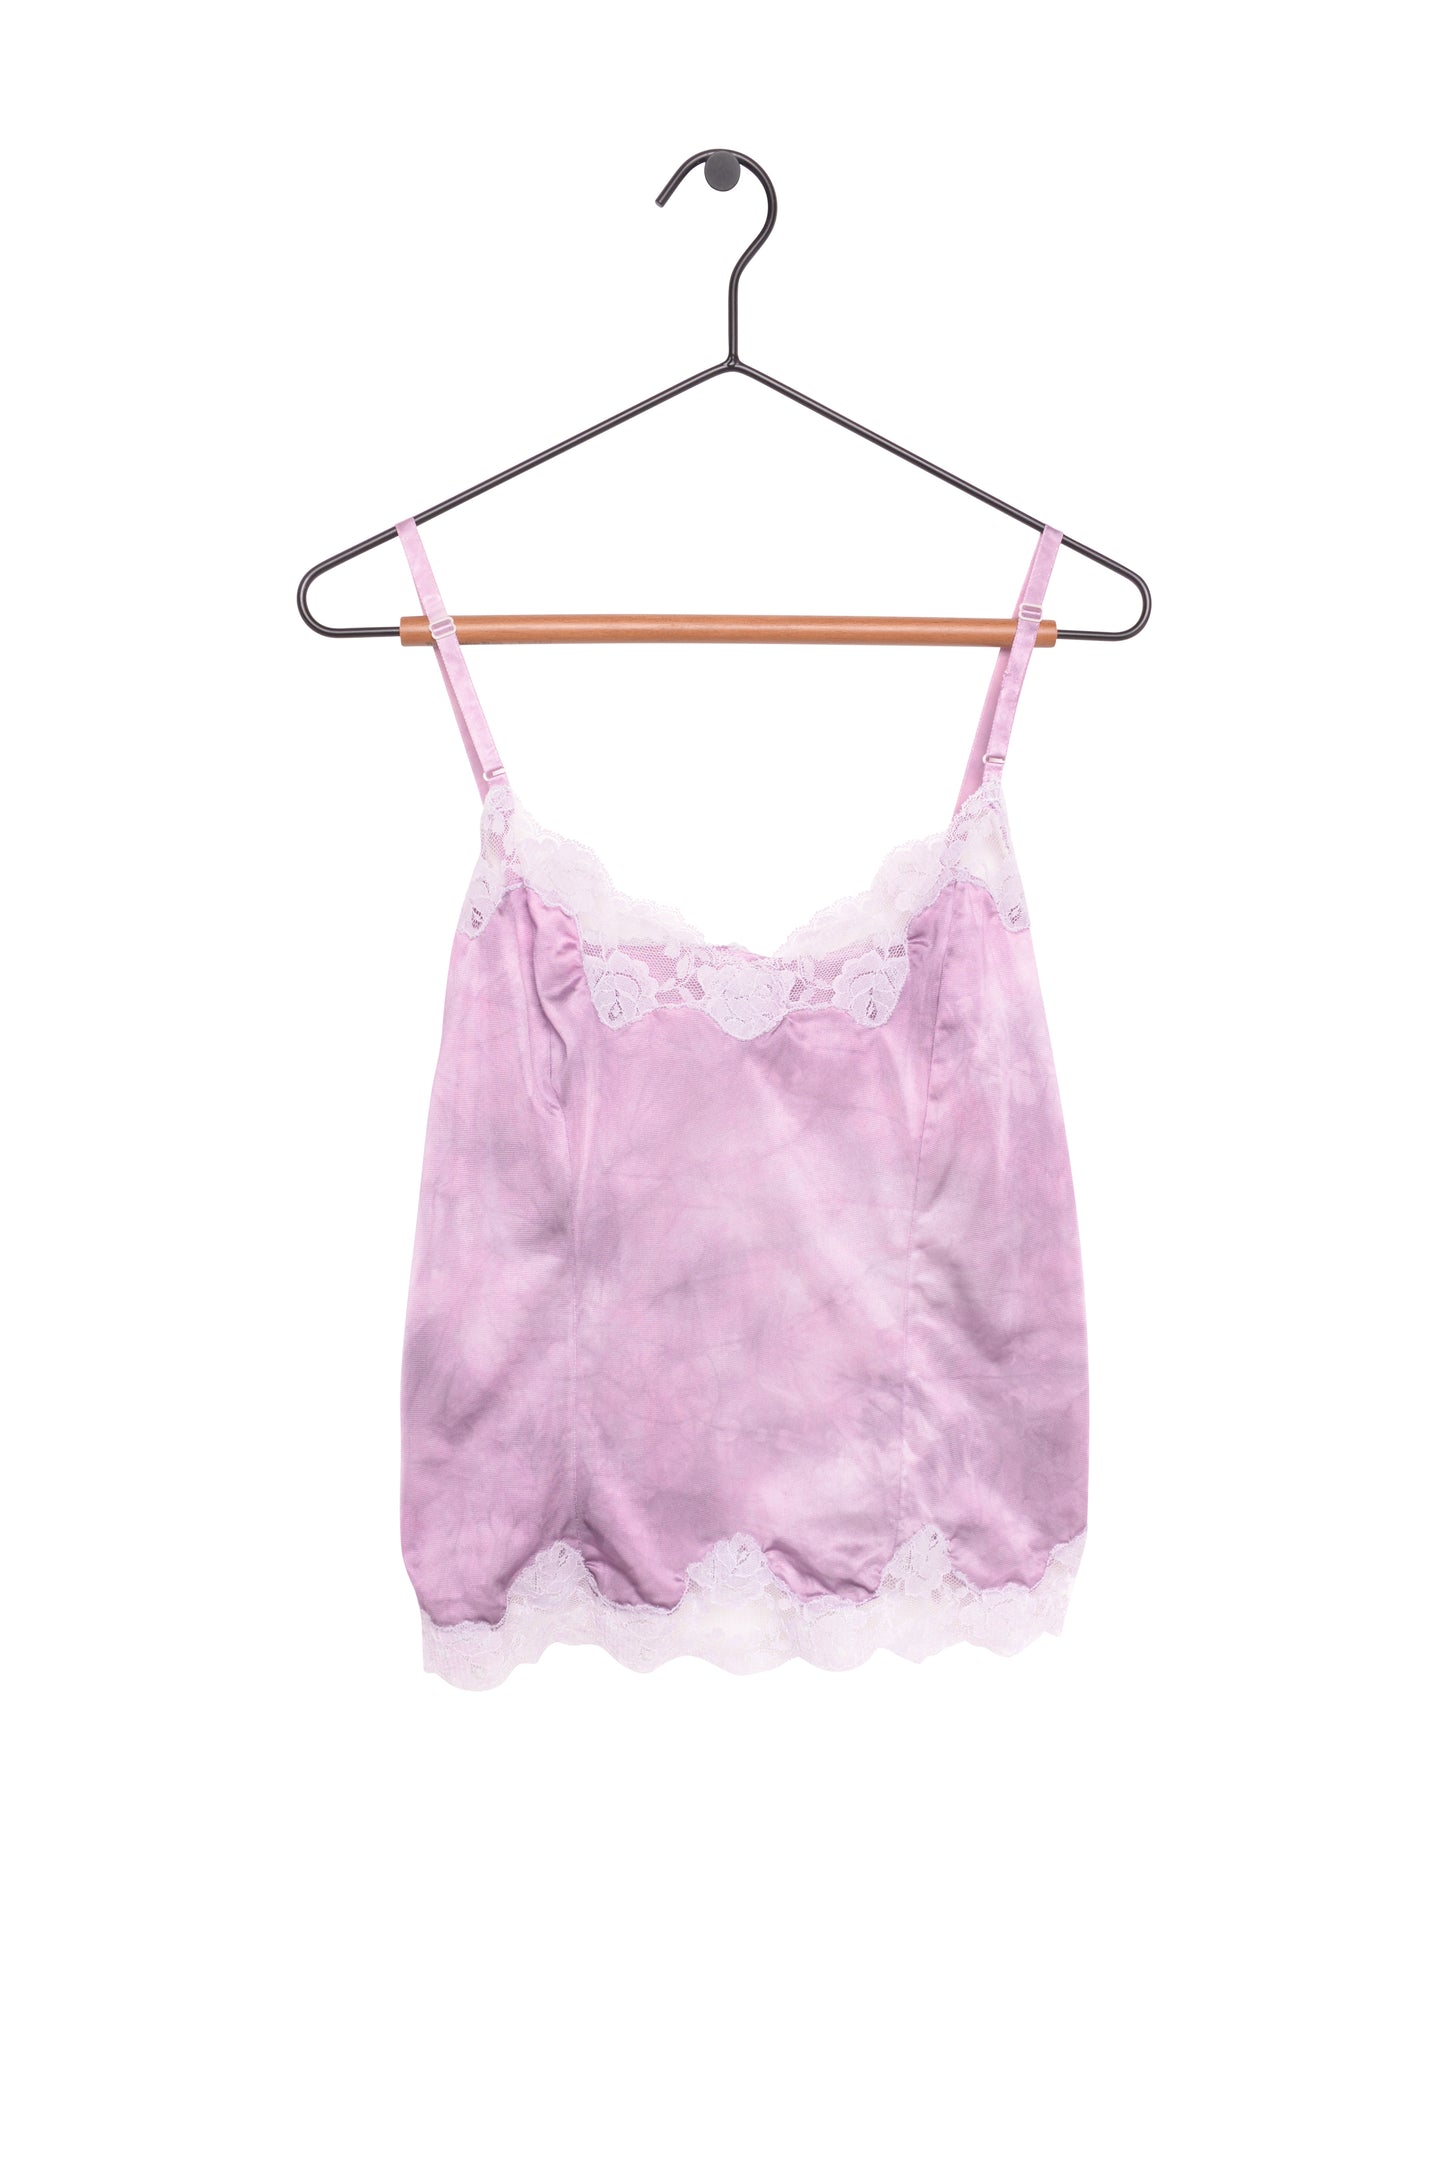 Hand-Dyed Lace Slip Top